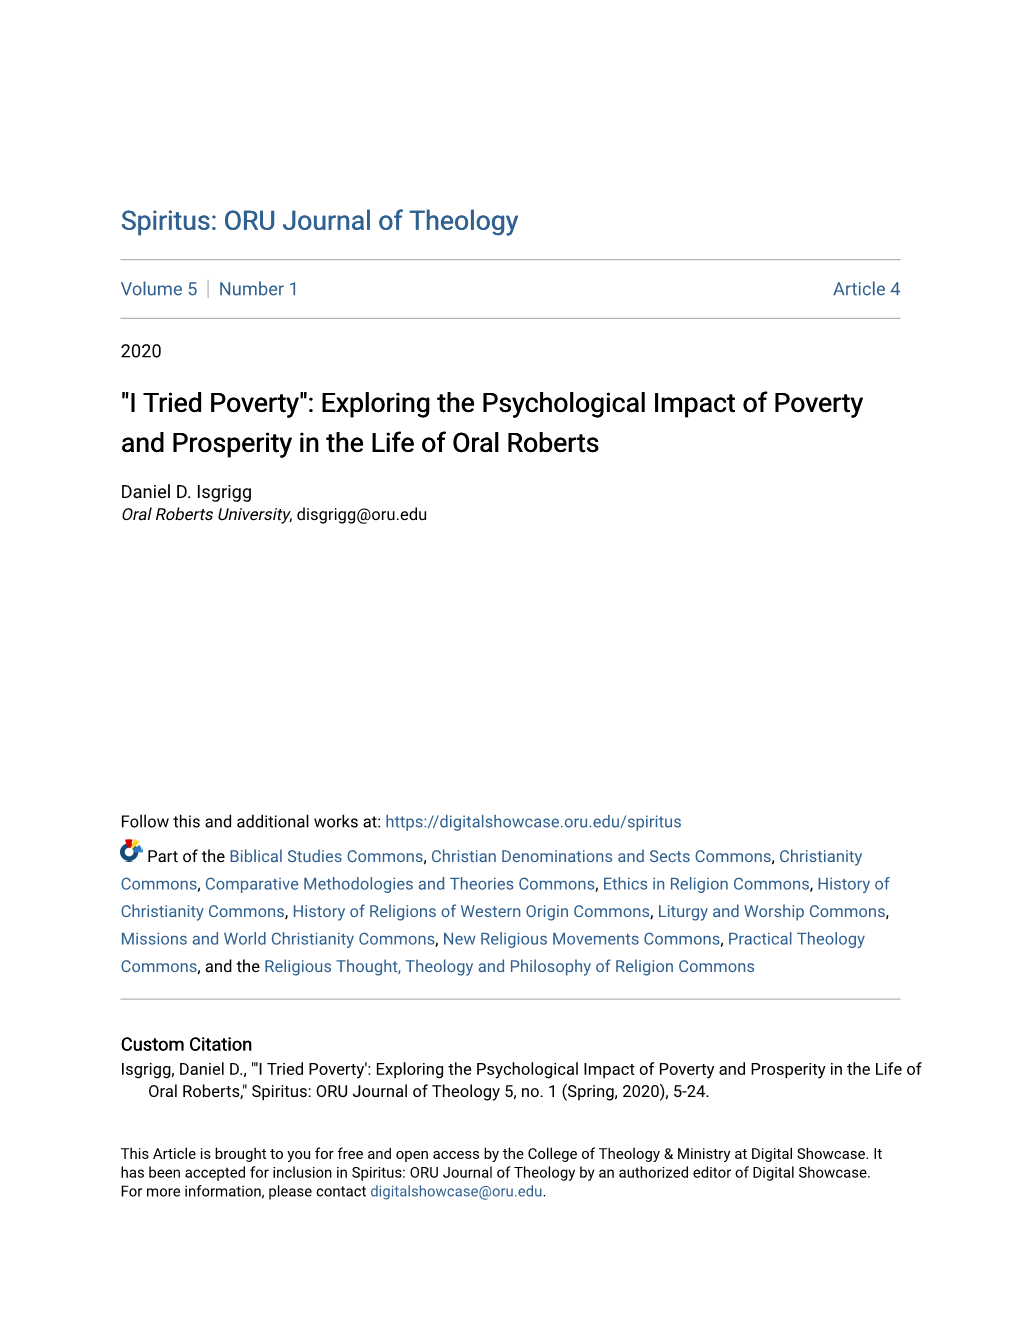 Exploring the Psychological Impact of Poverty and Prosperity in the Life of Oral Roberts